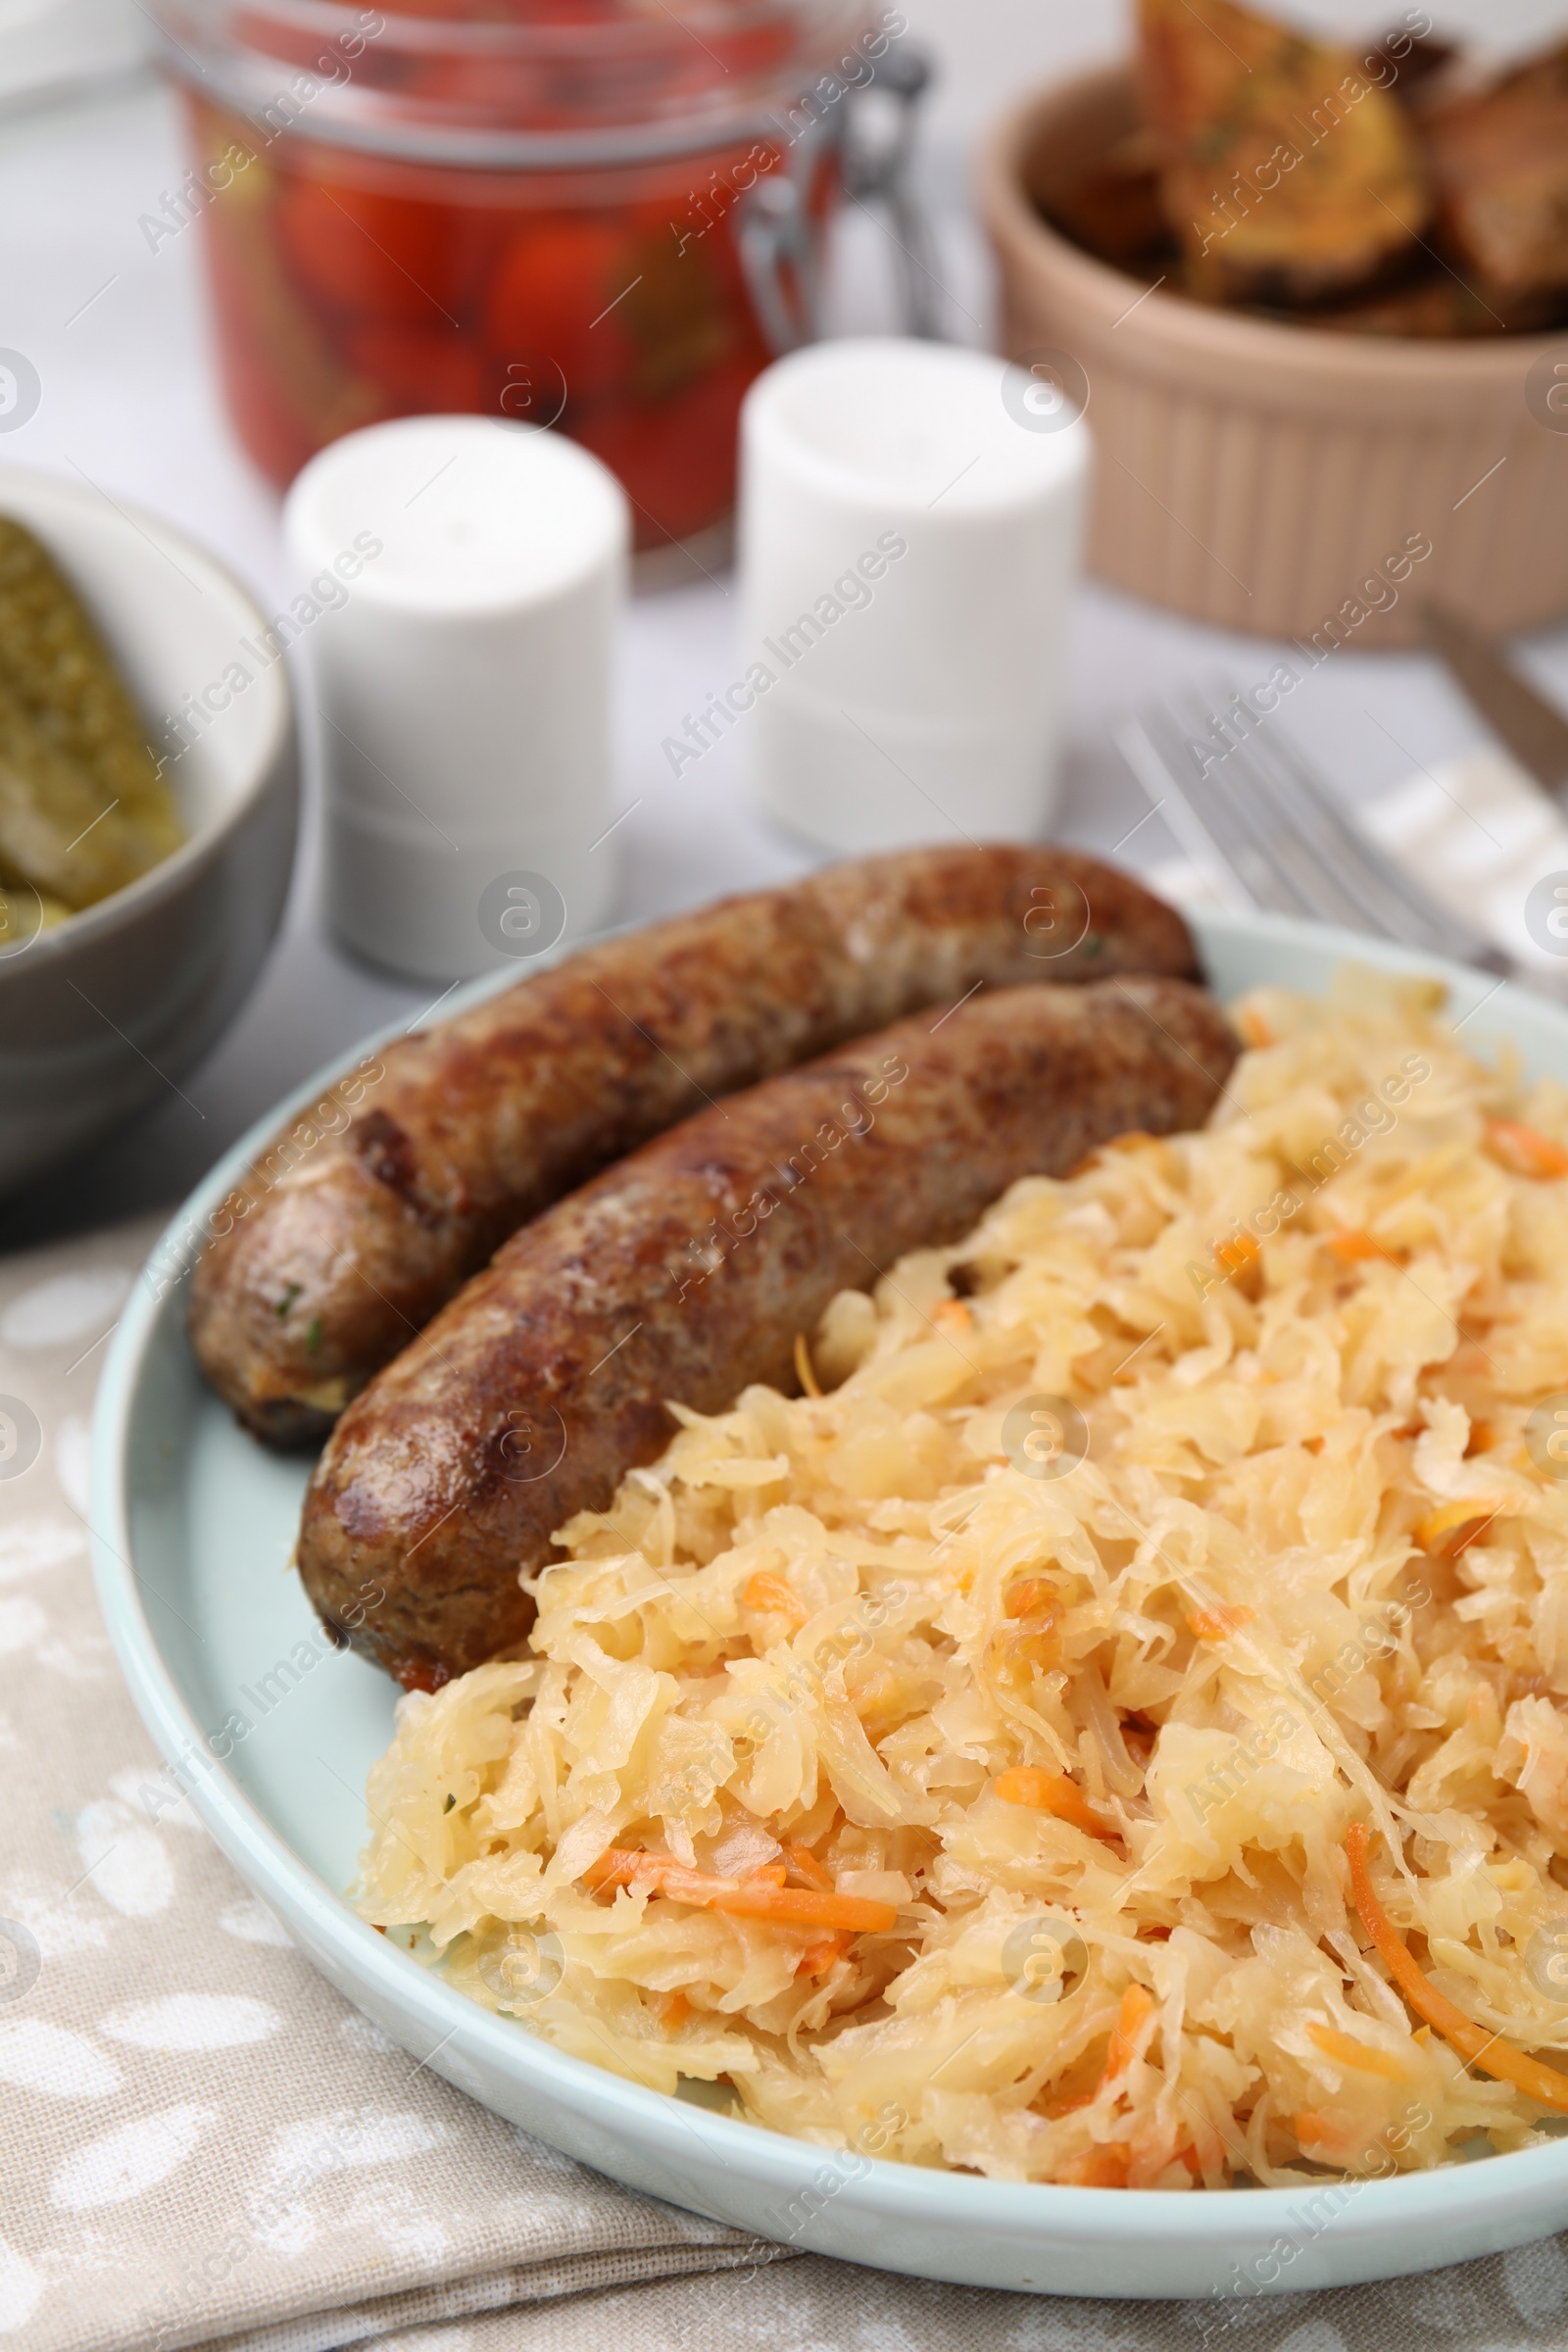 Photo of Plate with sauerkraut and sausages on table, closeup